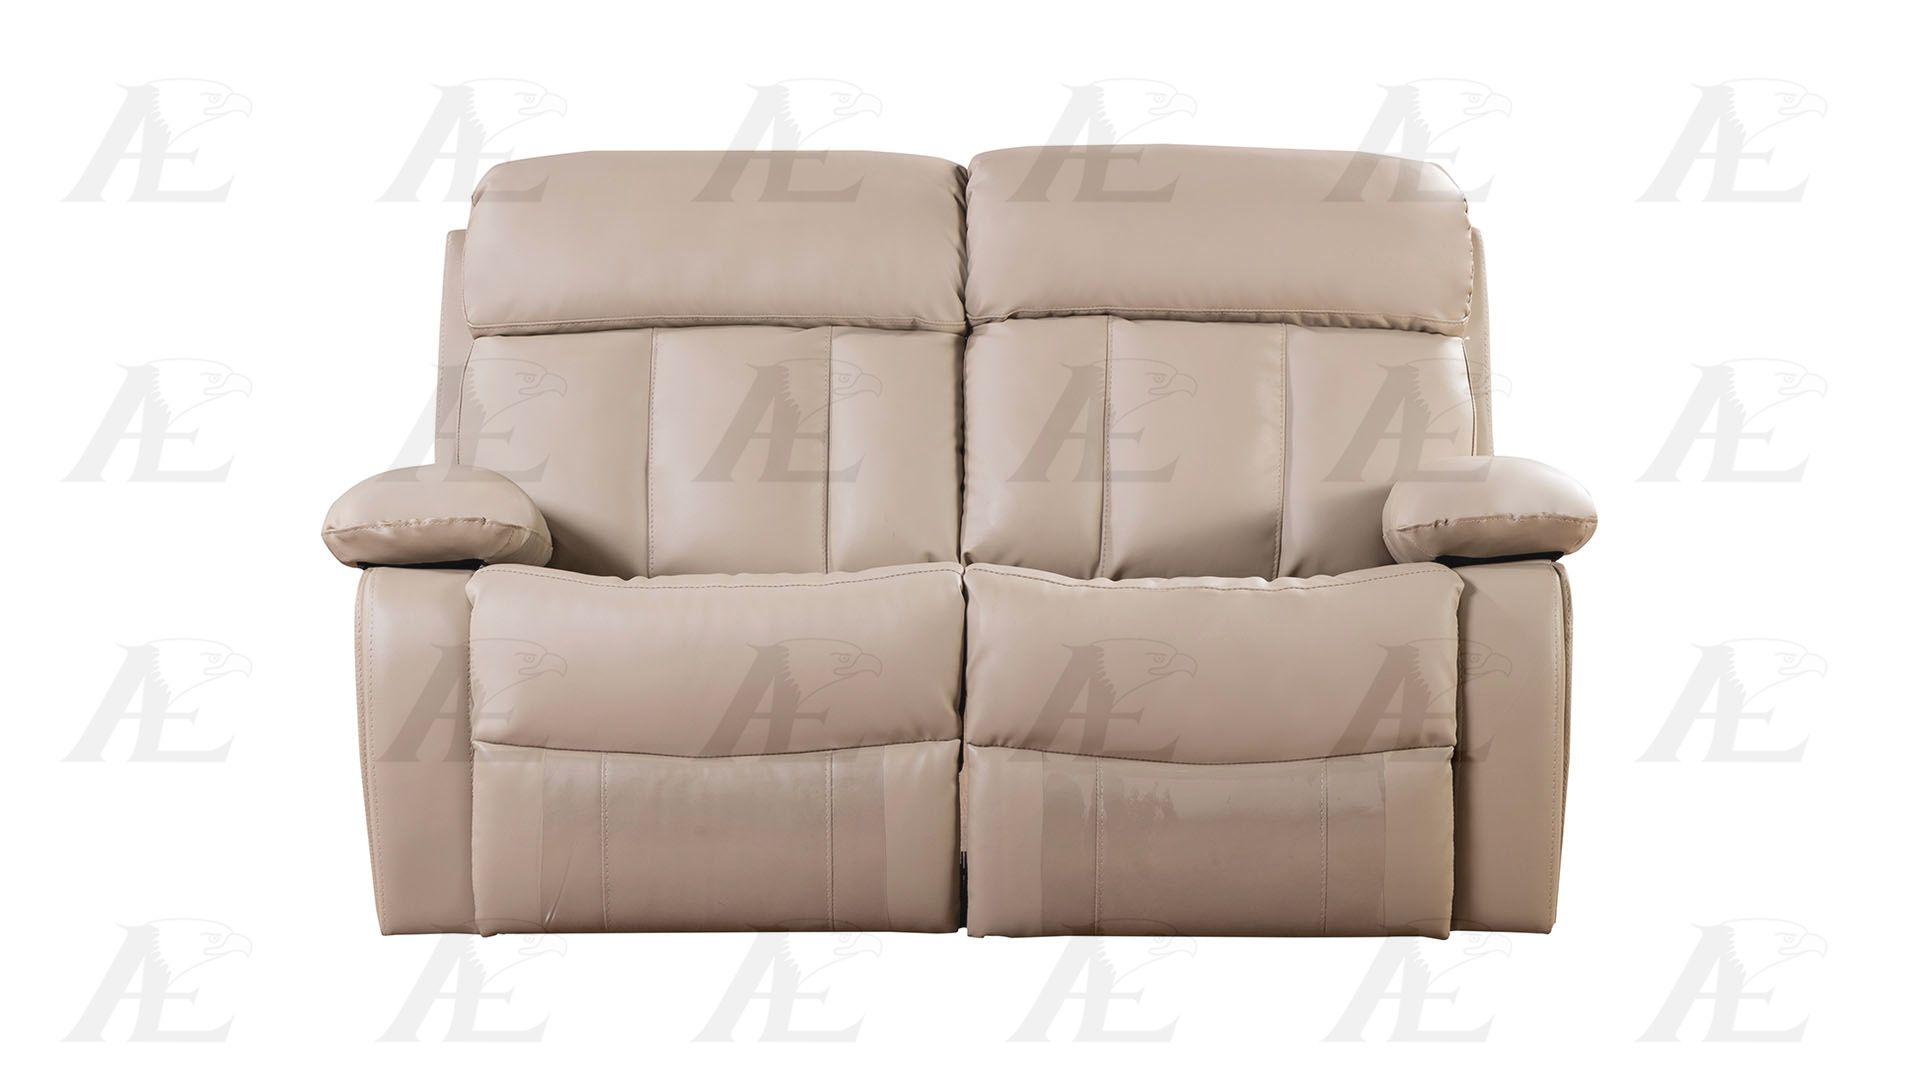 

                    
American Eagle Furniture AE-D825-TAN Reclining Tan Bonded Leather Purchase 
